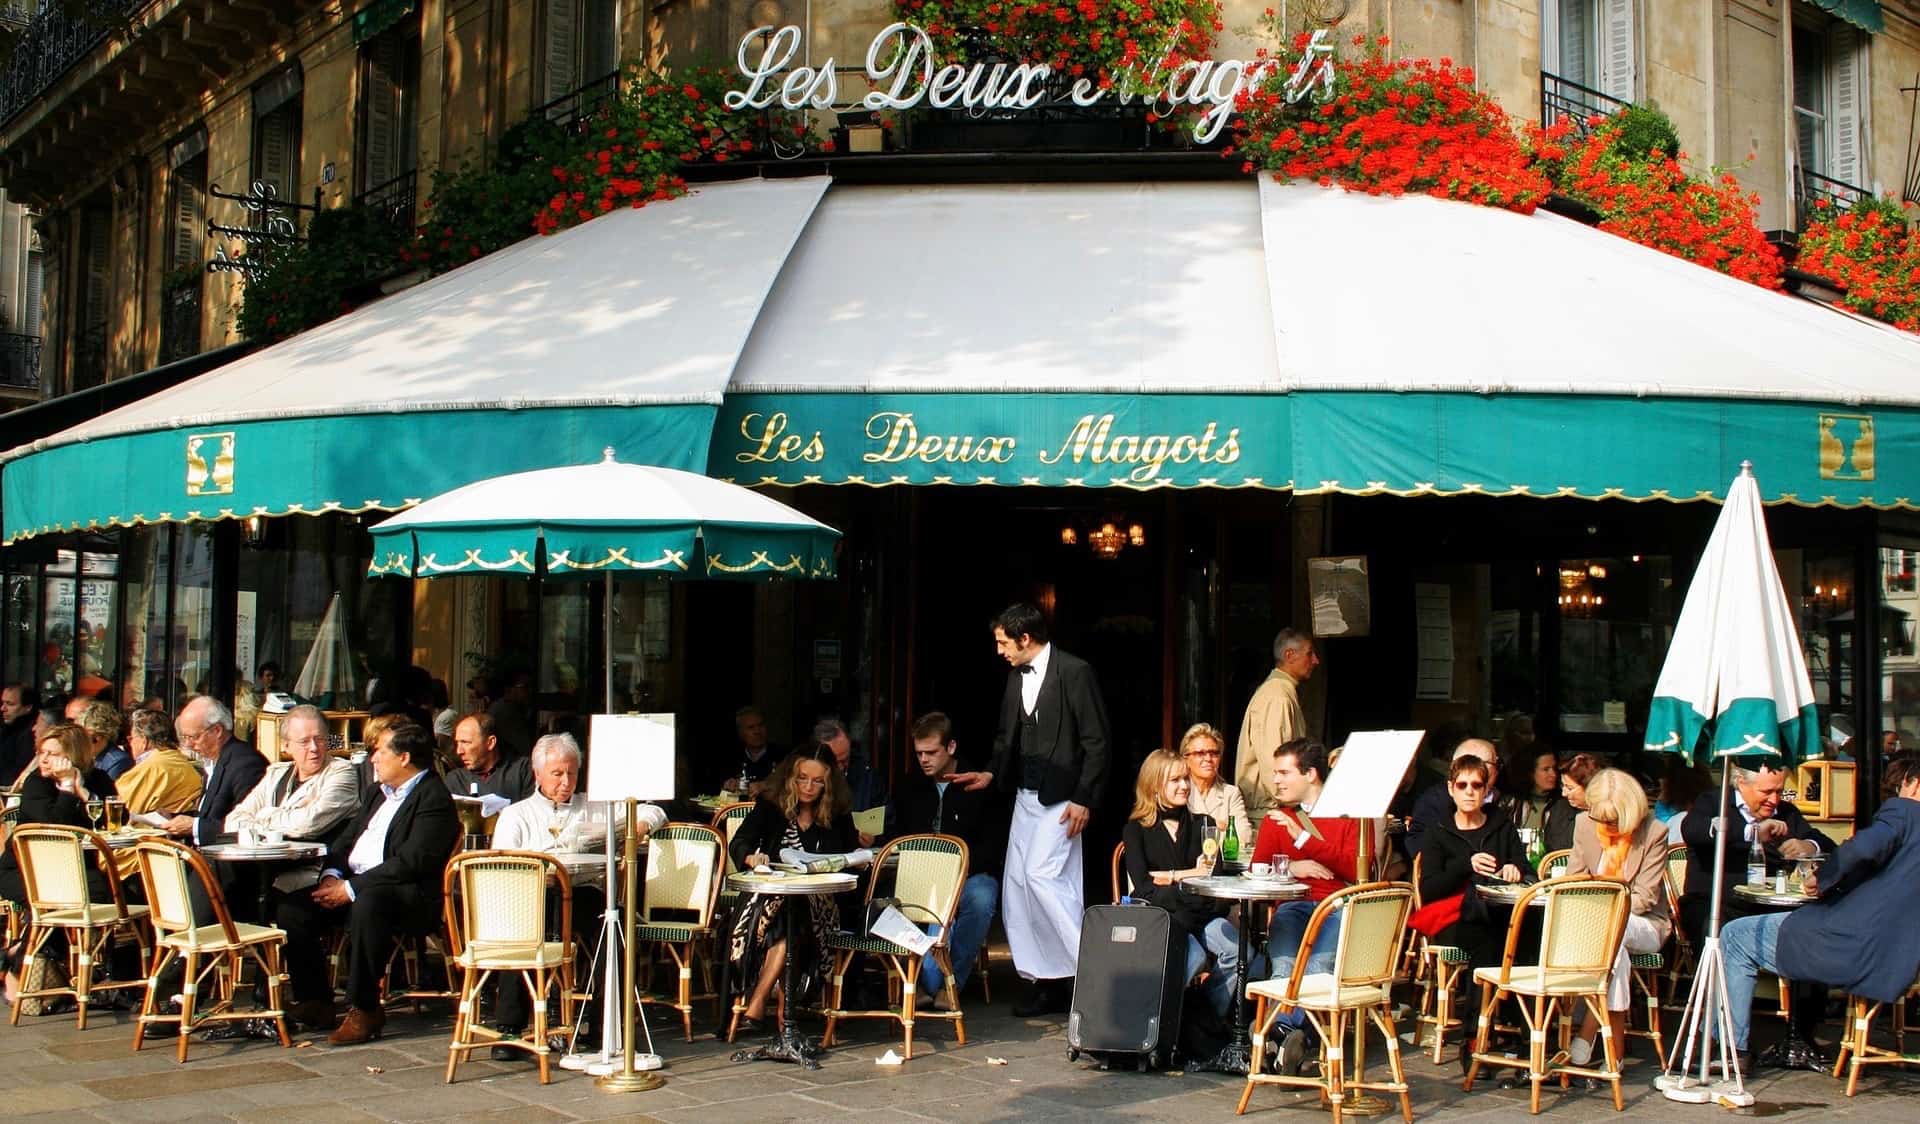 Locals and tourists relaxing at Les Deux Magots in Paris, France